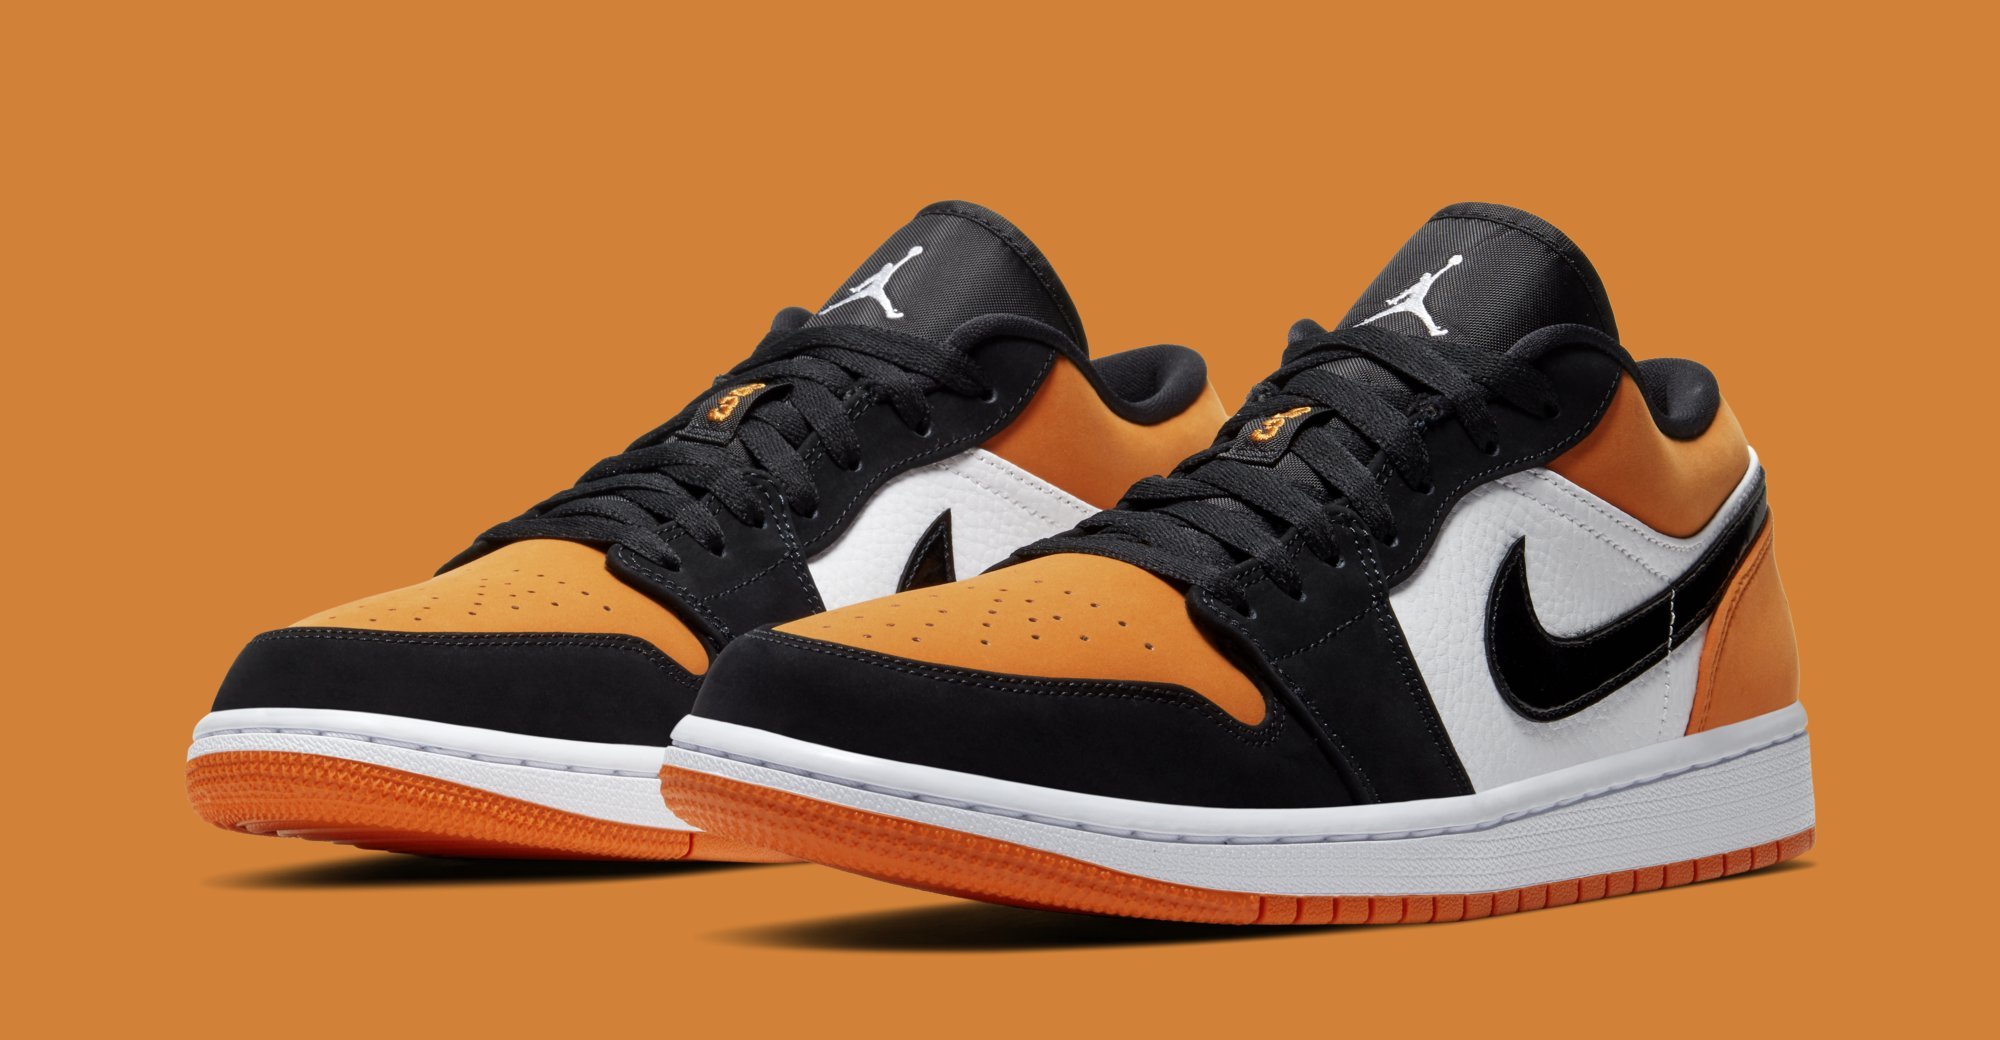 Best Yet at 'Shattered Backboard' Air 1 Low | Complex